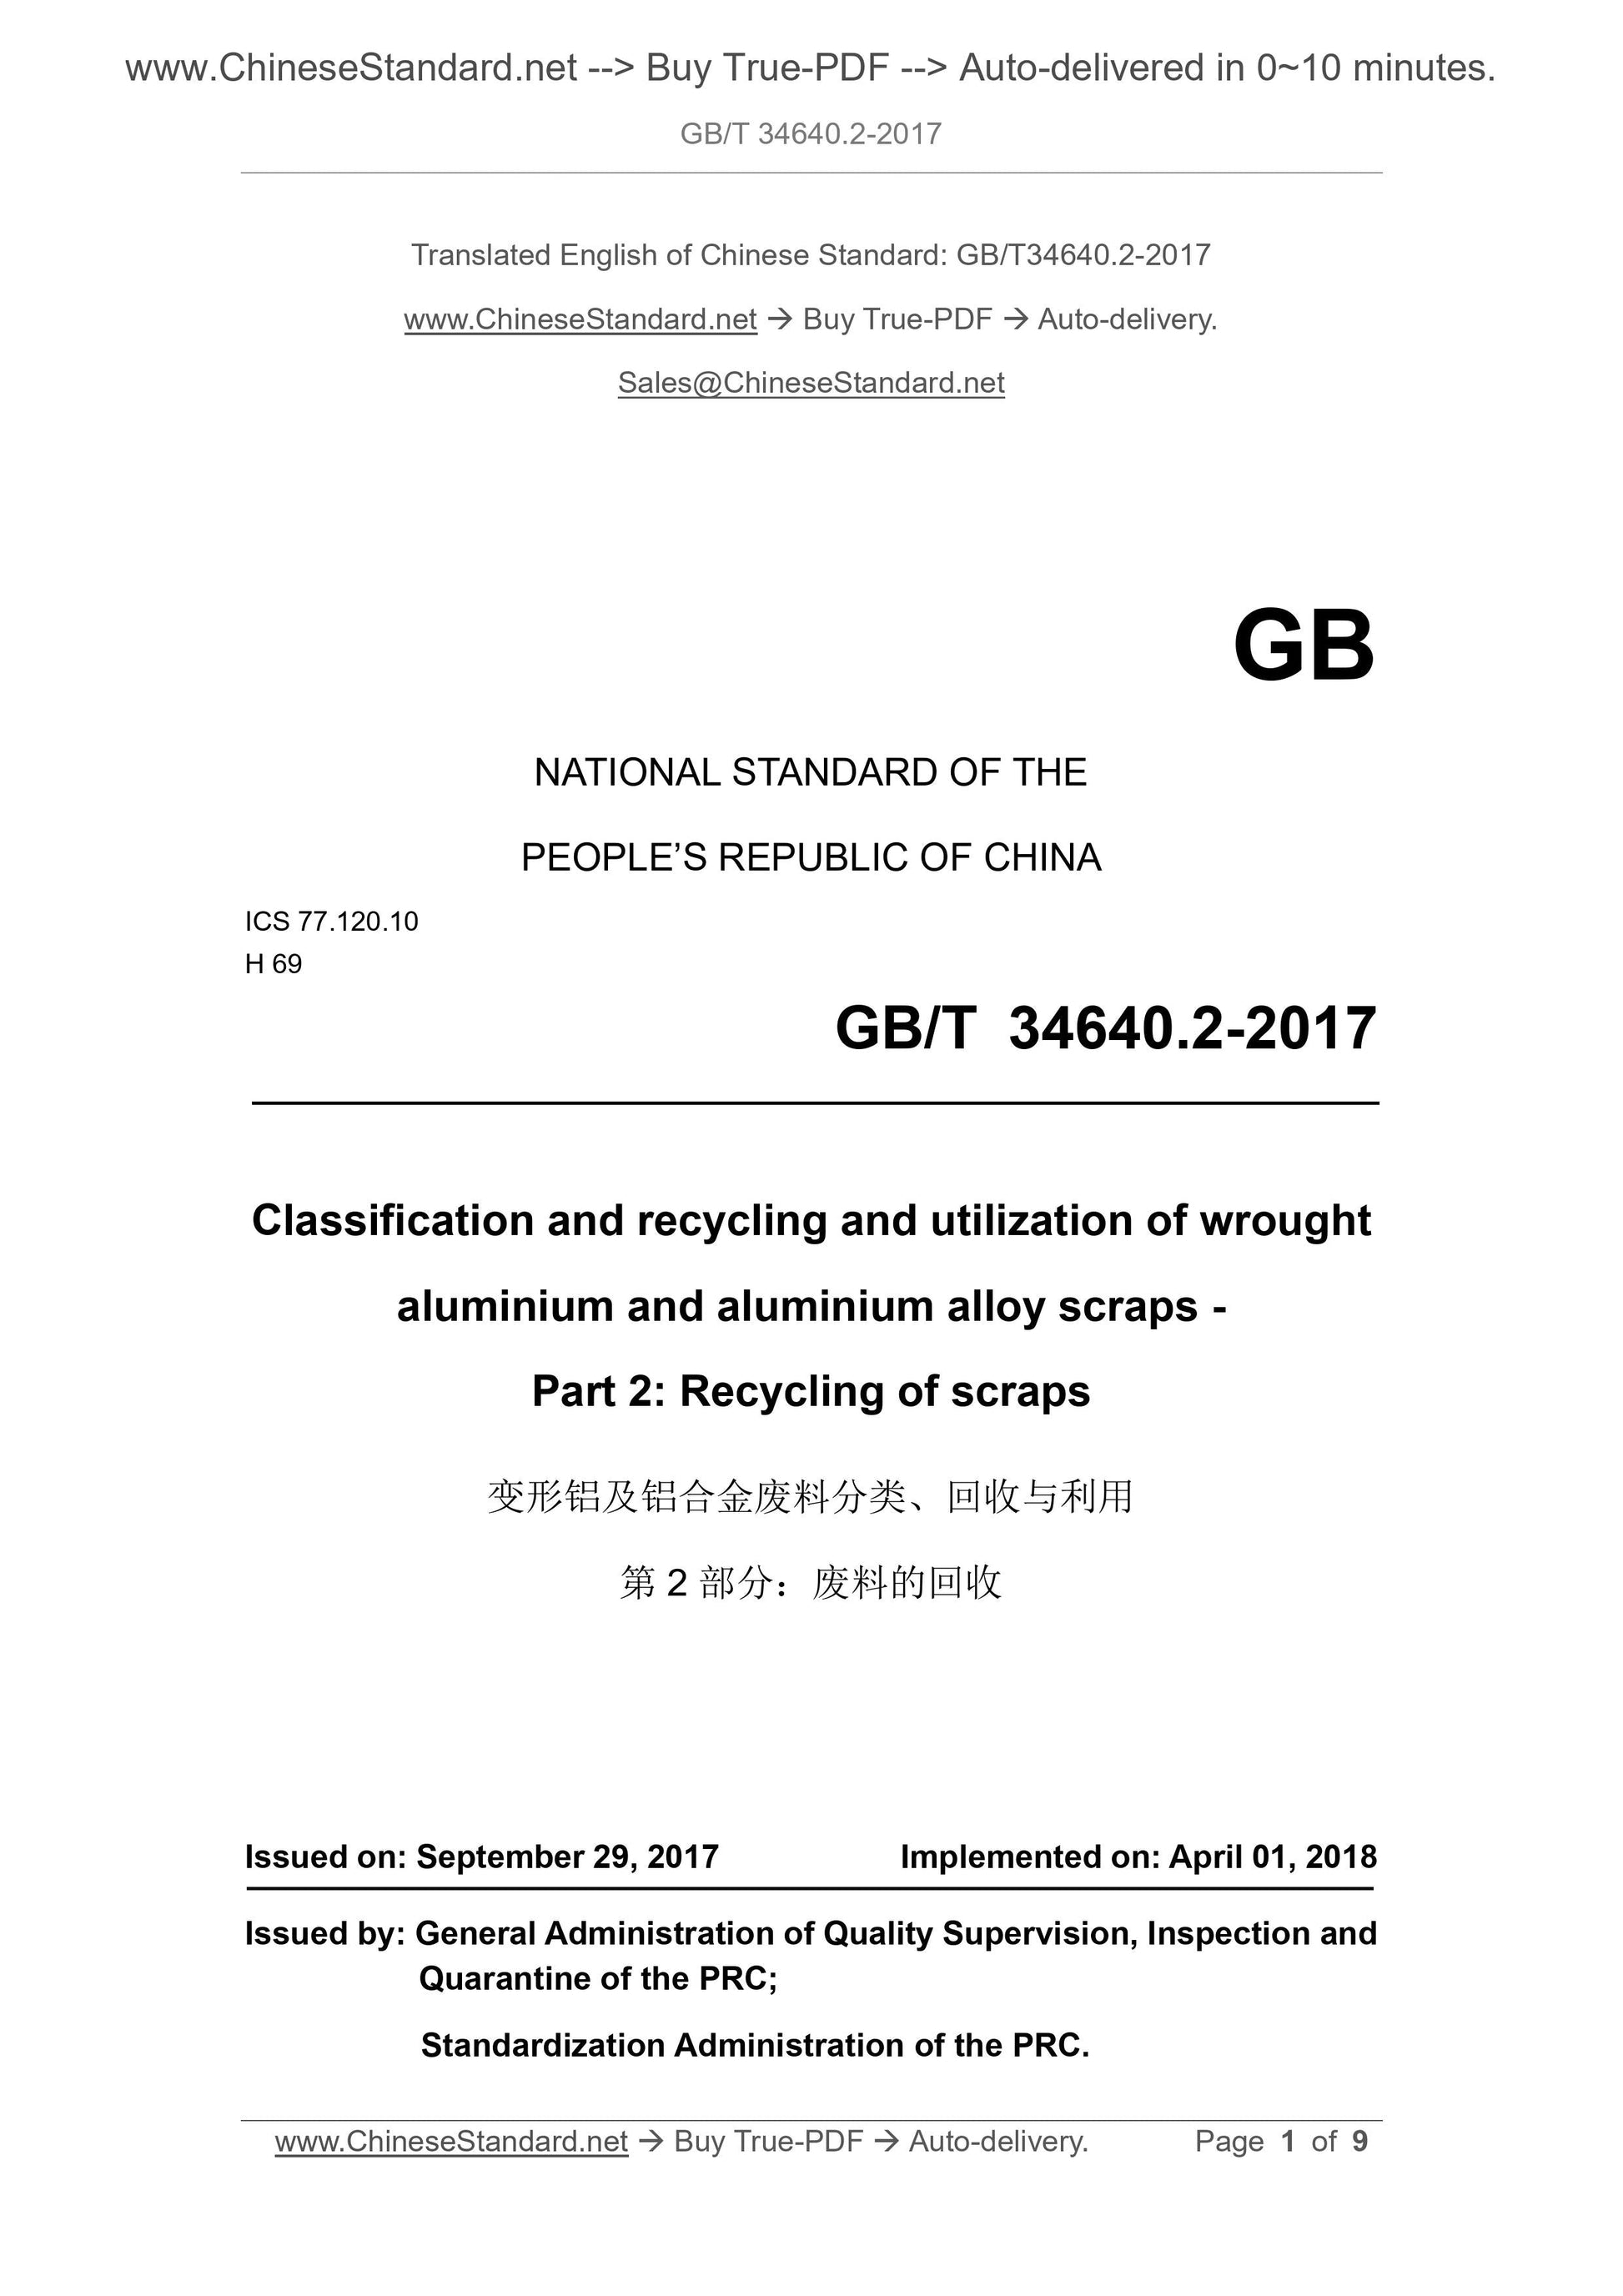 GB/T 34640.2-2017 Page 1